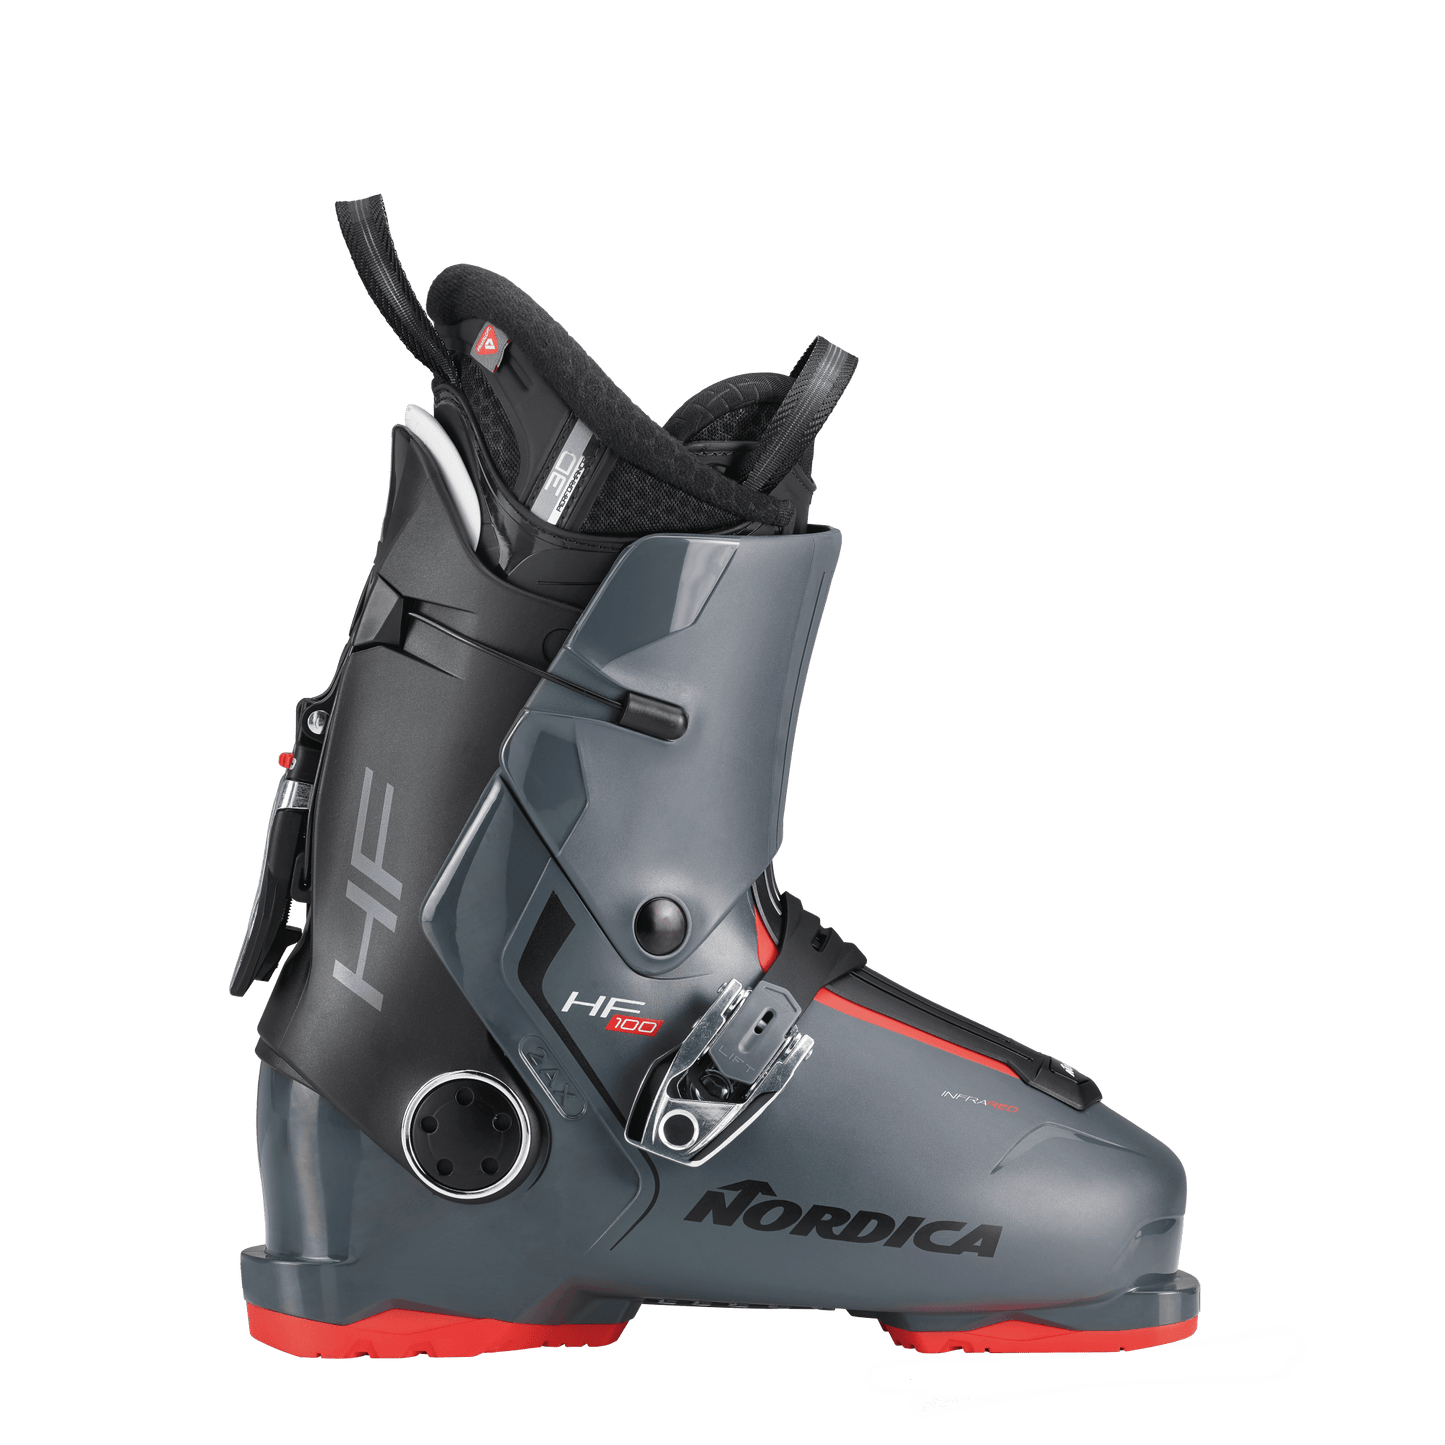 Side view of the Nordica HF 100 alpine Ski boot